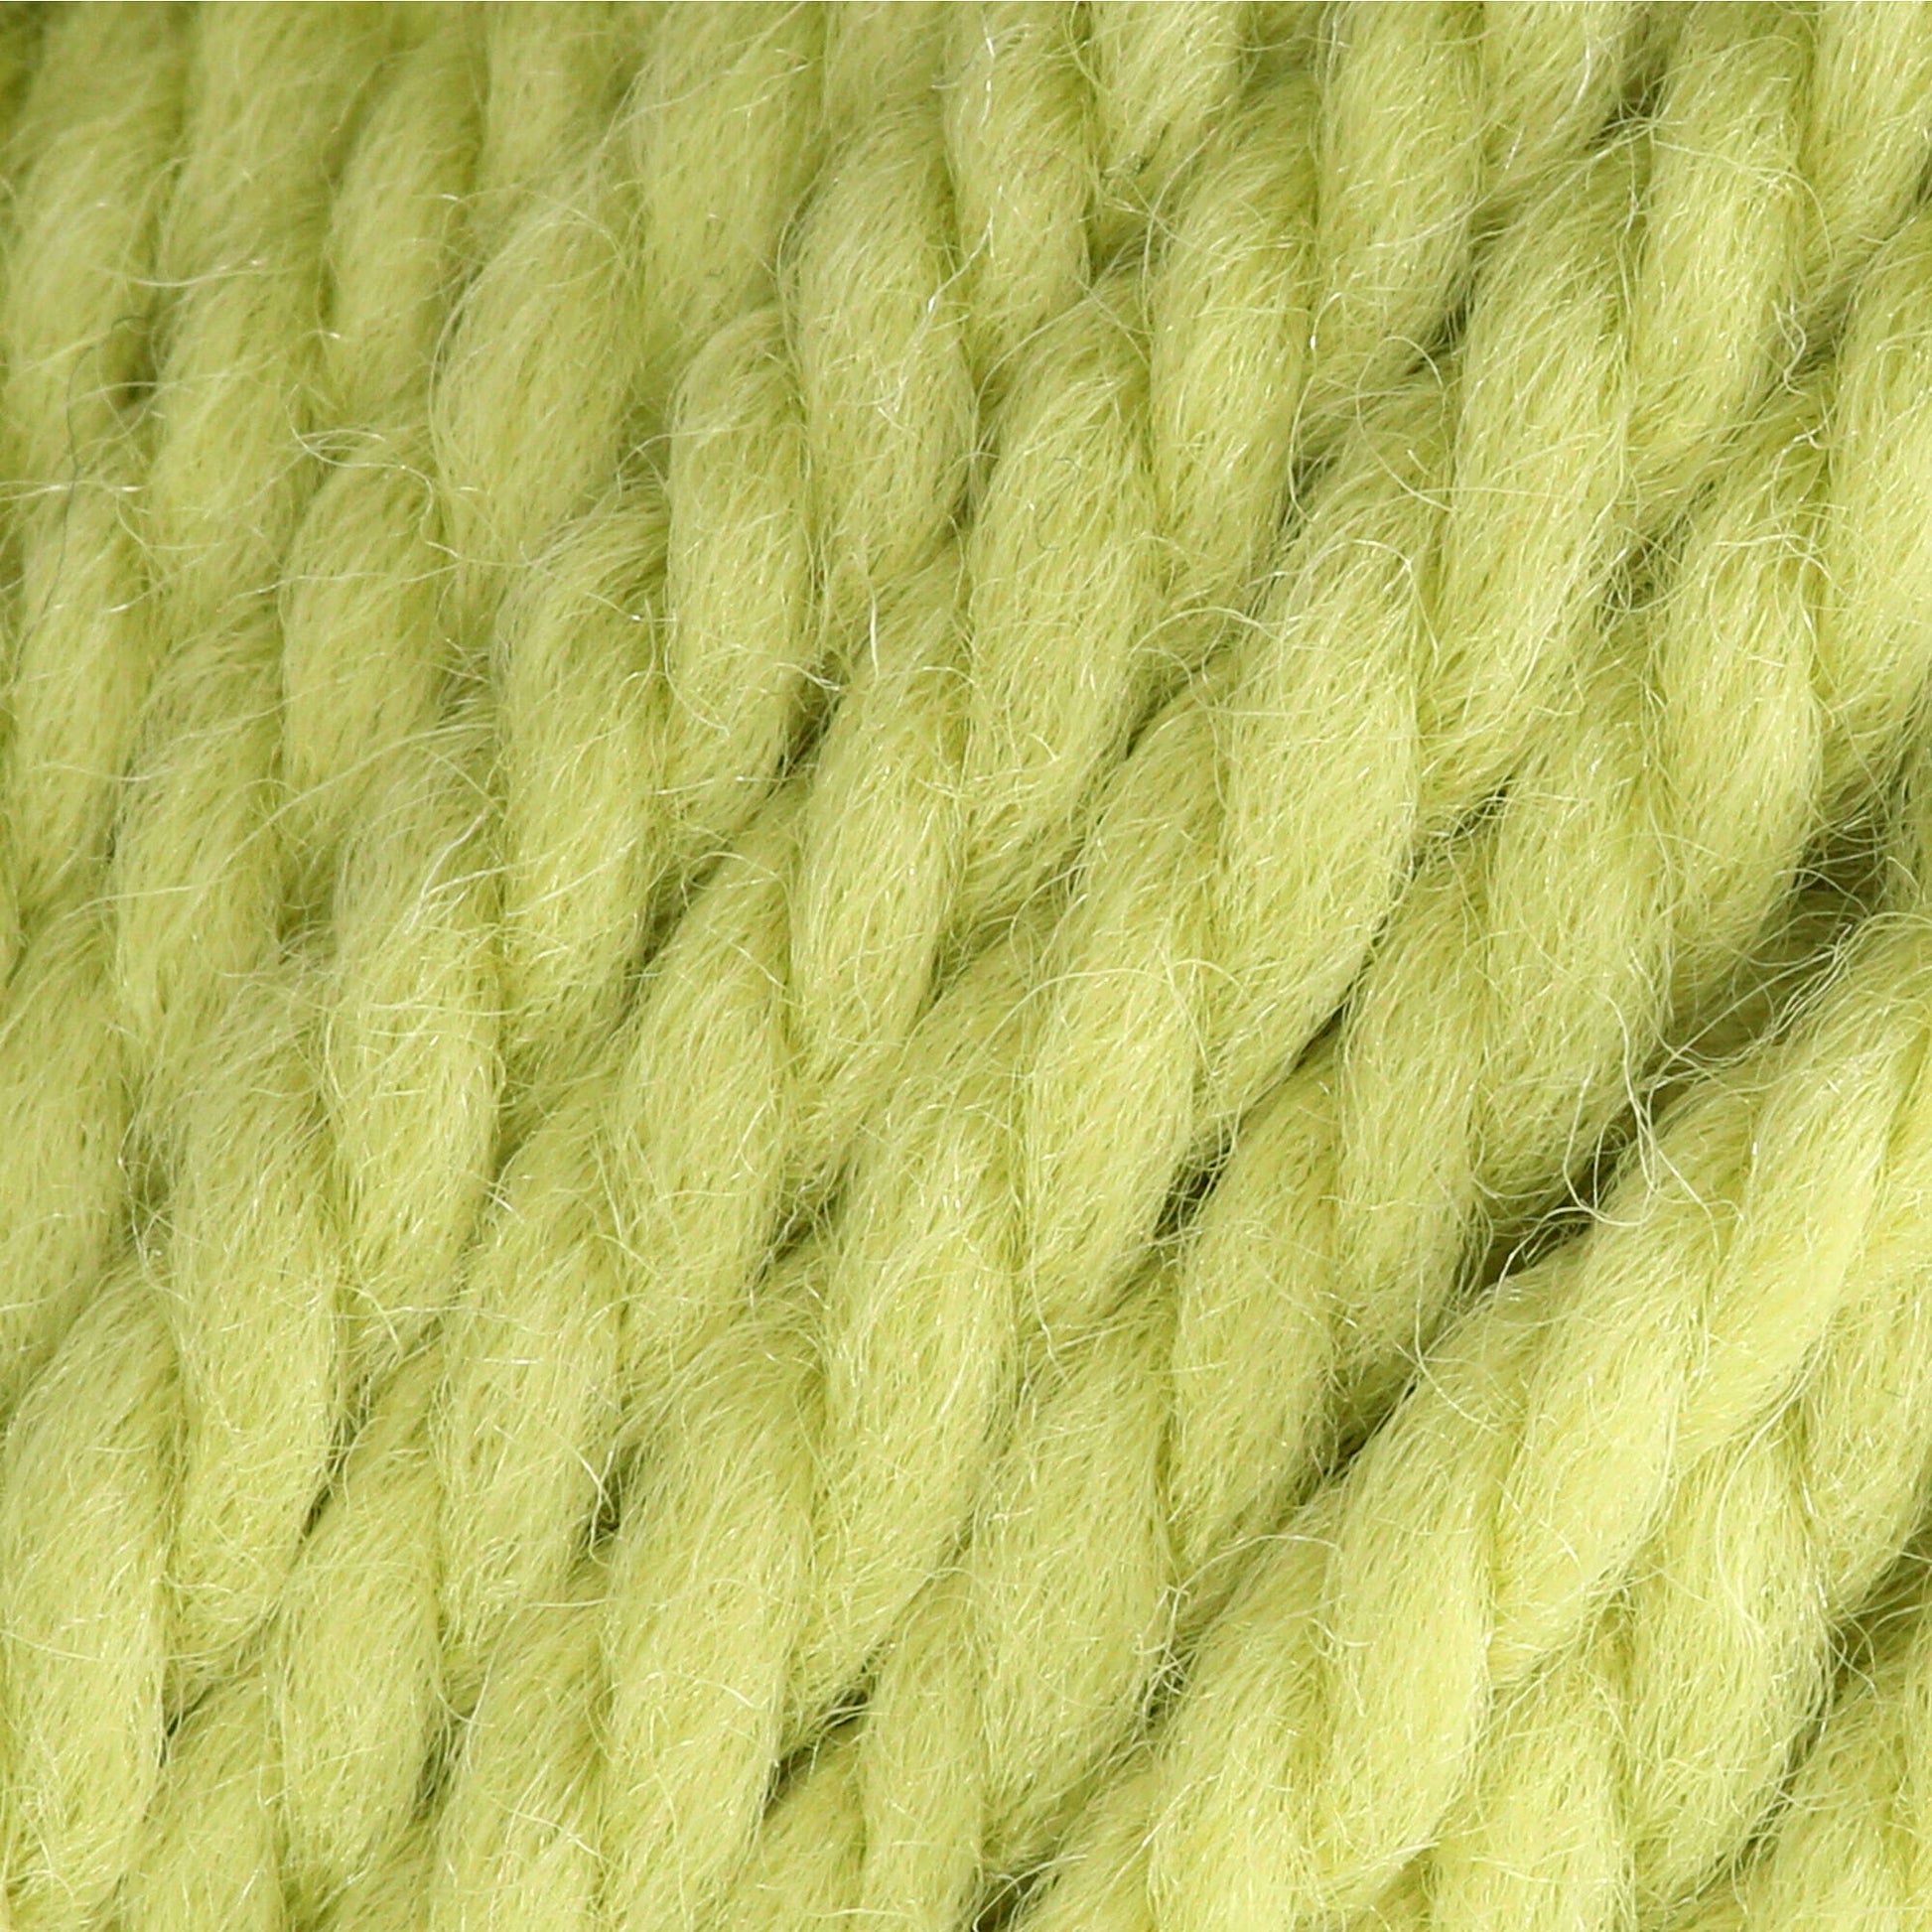 Patons Classic Wool Bulky Yarn - Discontinued Shades Spring Green